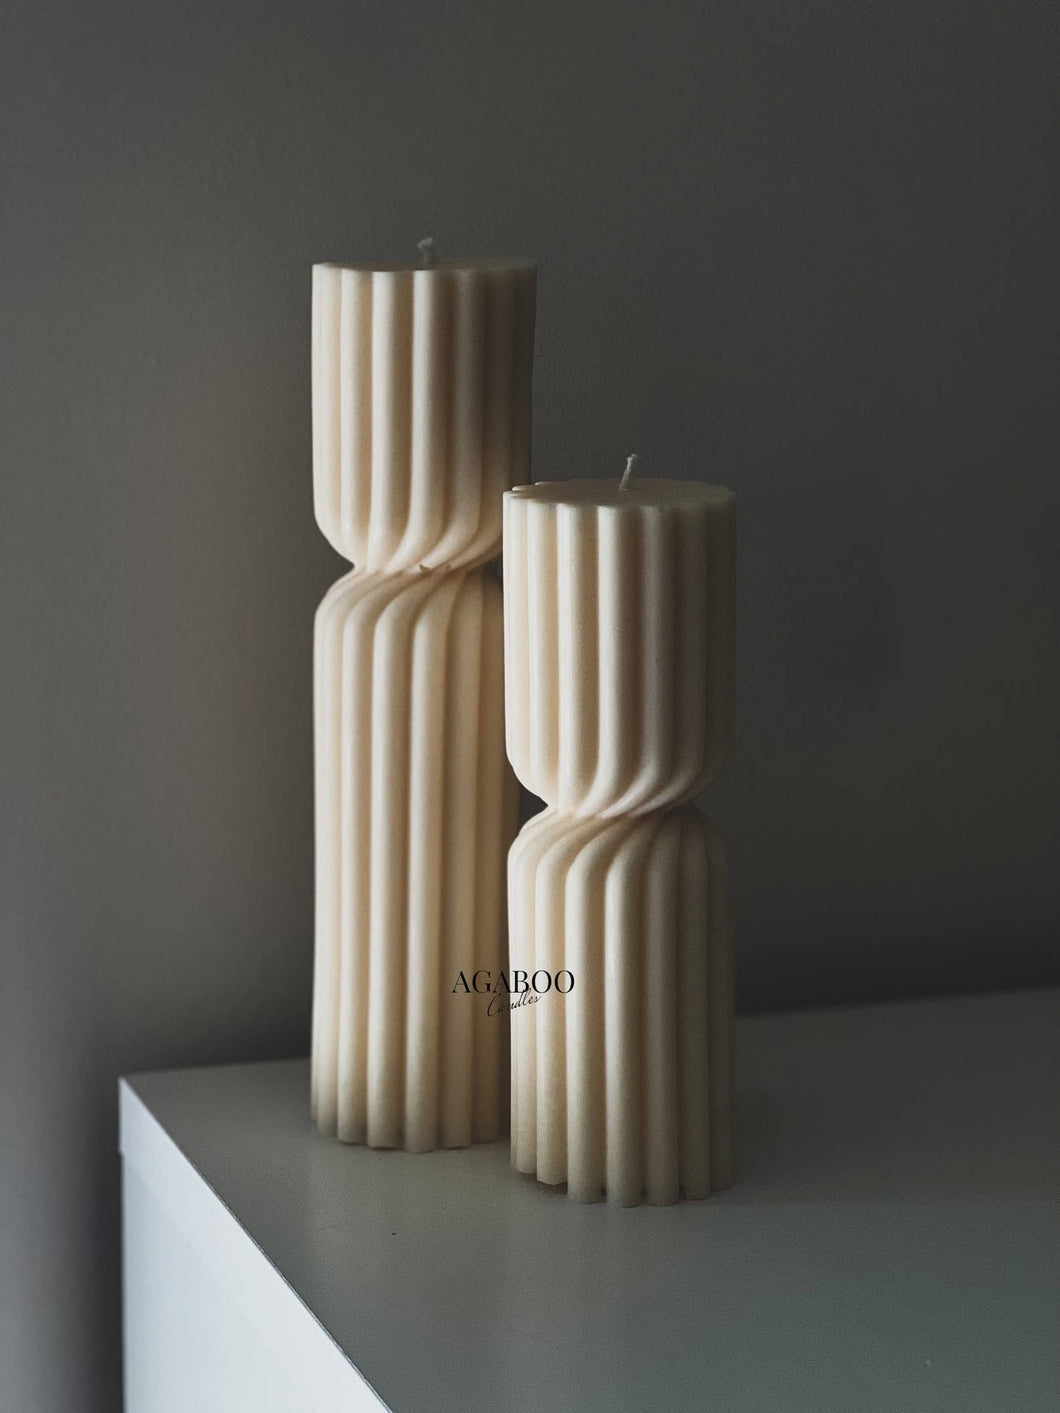 Agaboo Candle - Huge Twisted Ribbed Pillar Candle: Golden Honey / Small